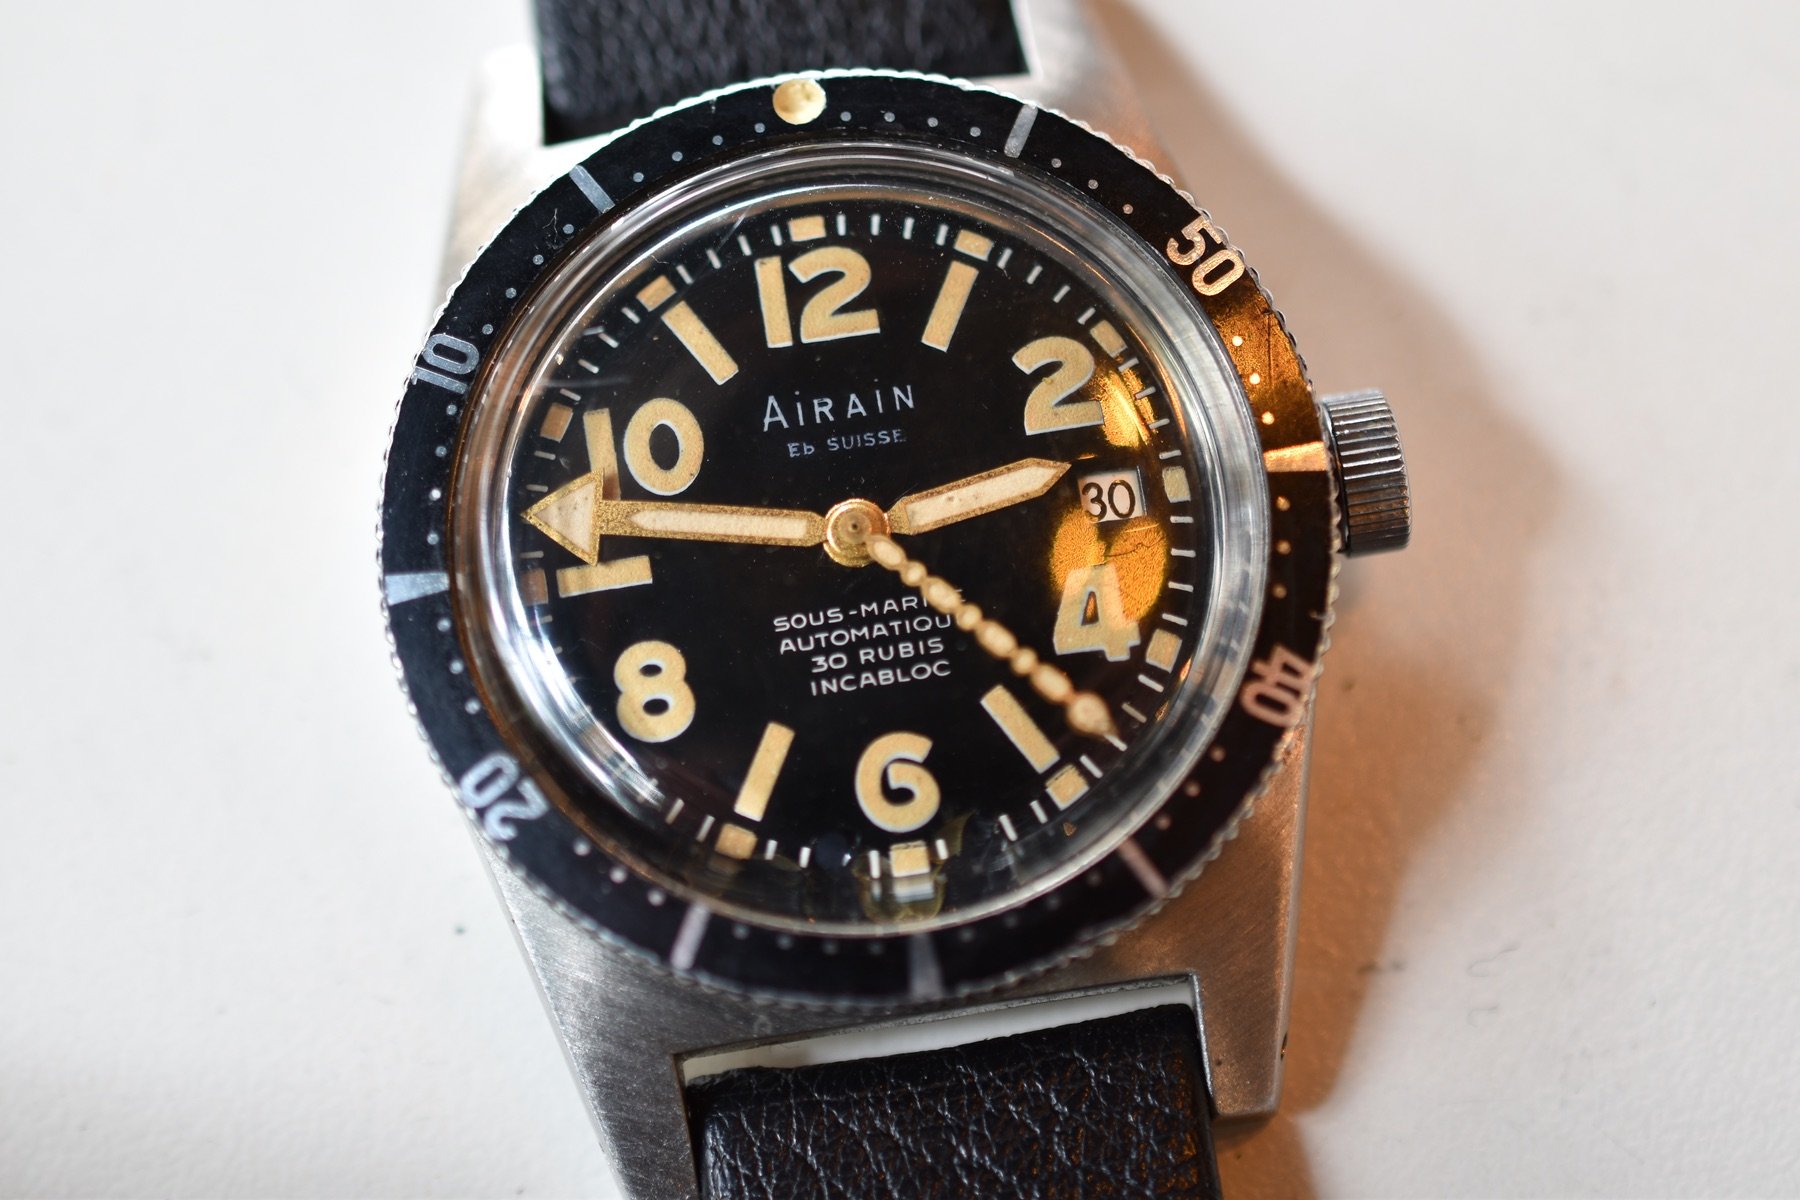 vintage watches aren't as fragile as you may think Airain Sous-Marine